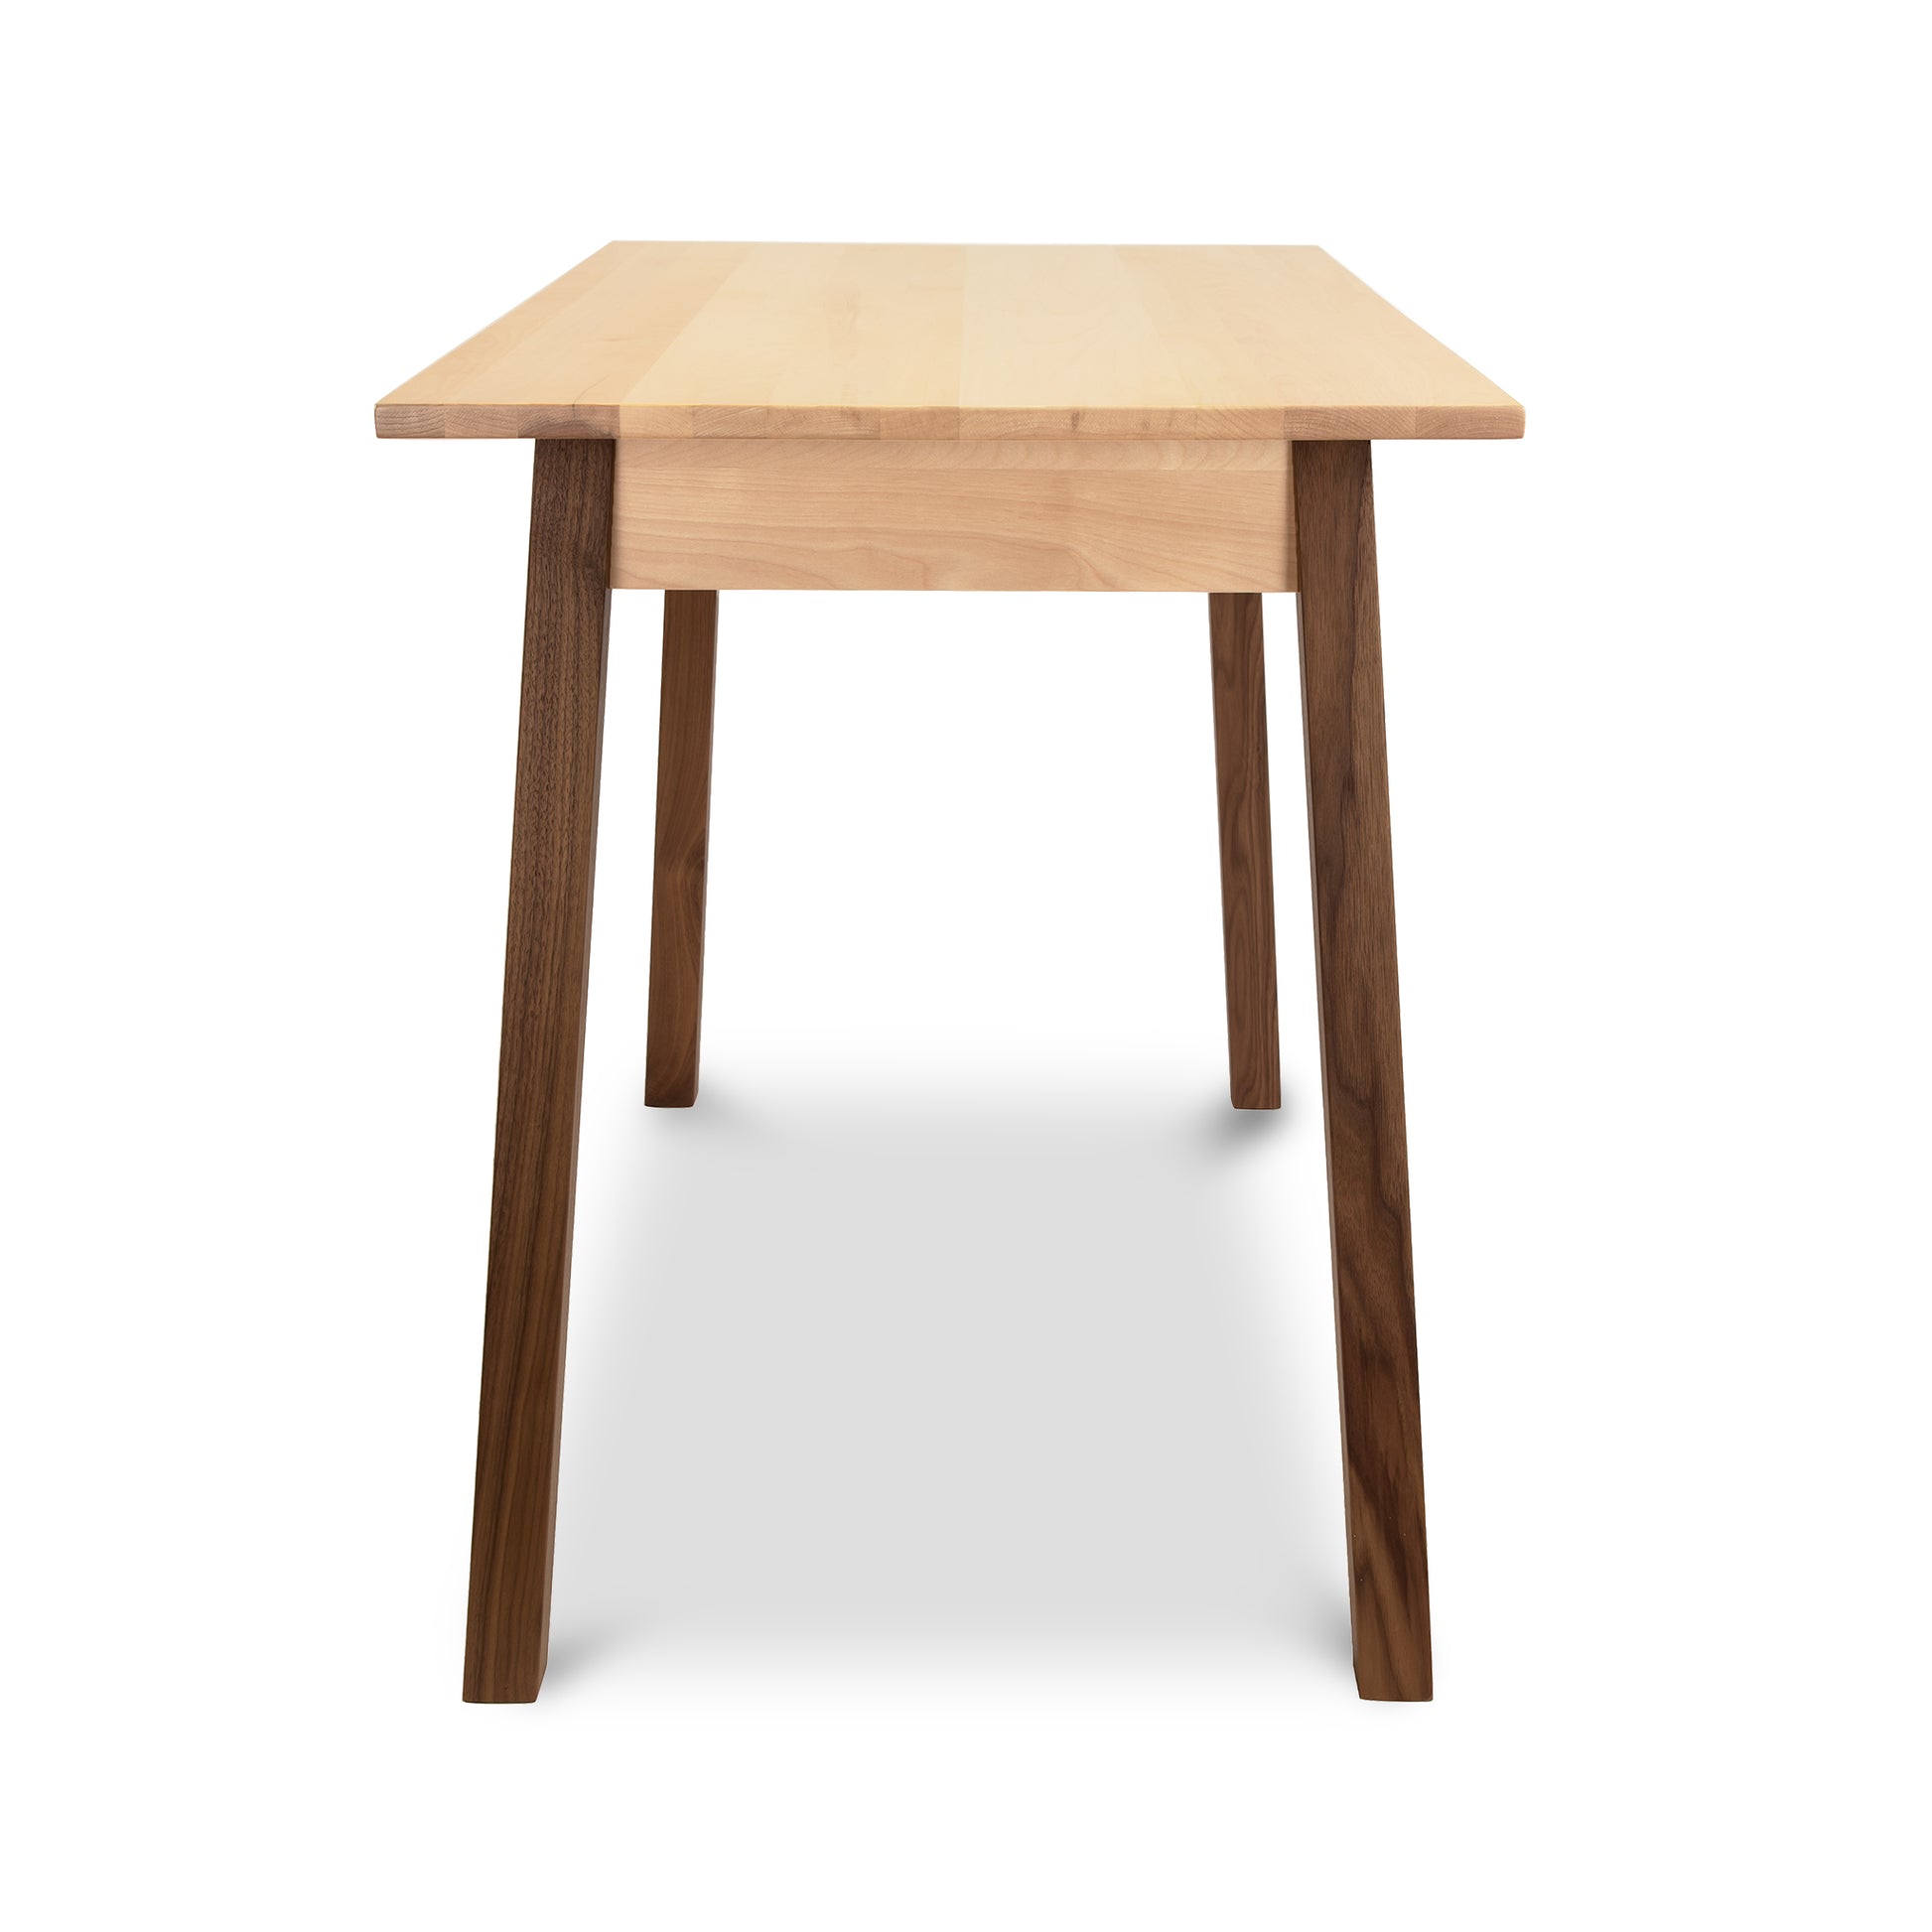 A wooden table with a wooden top and legs.